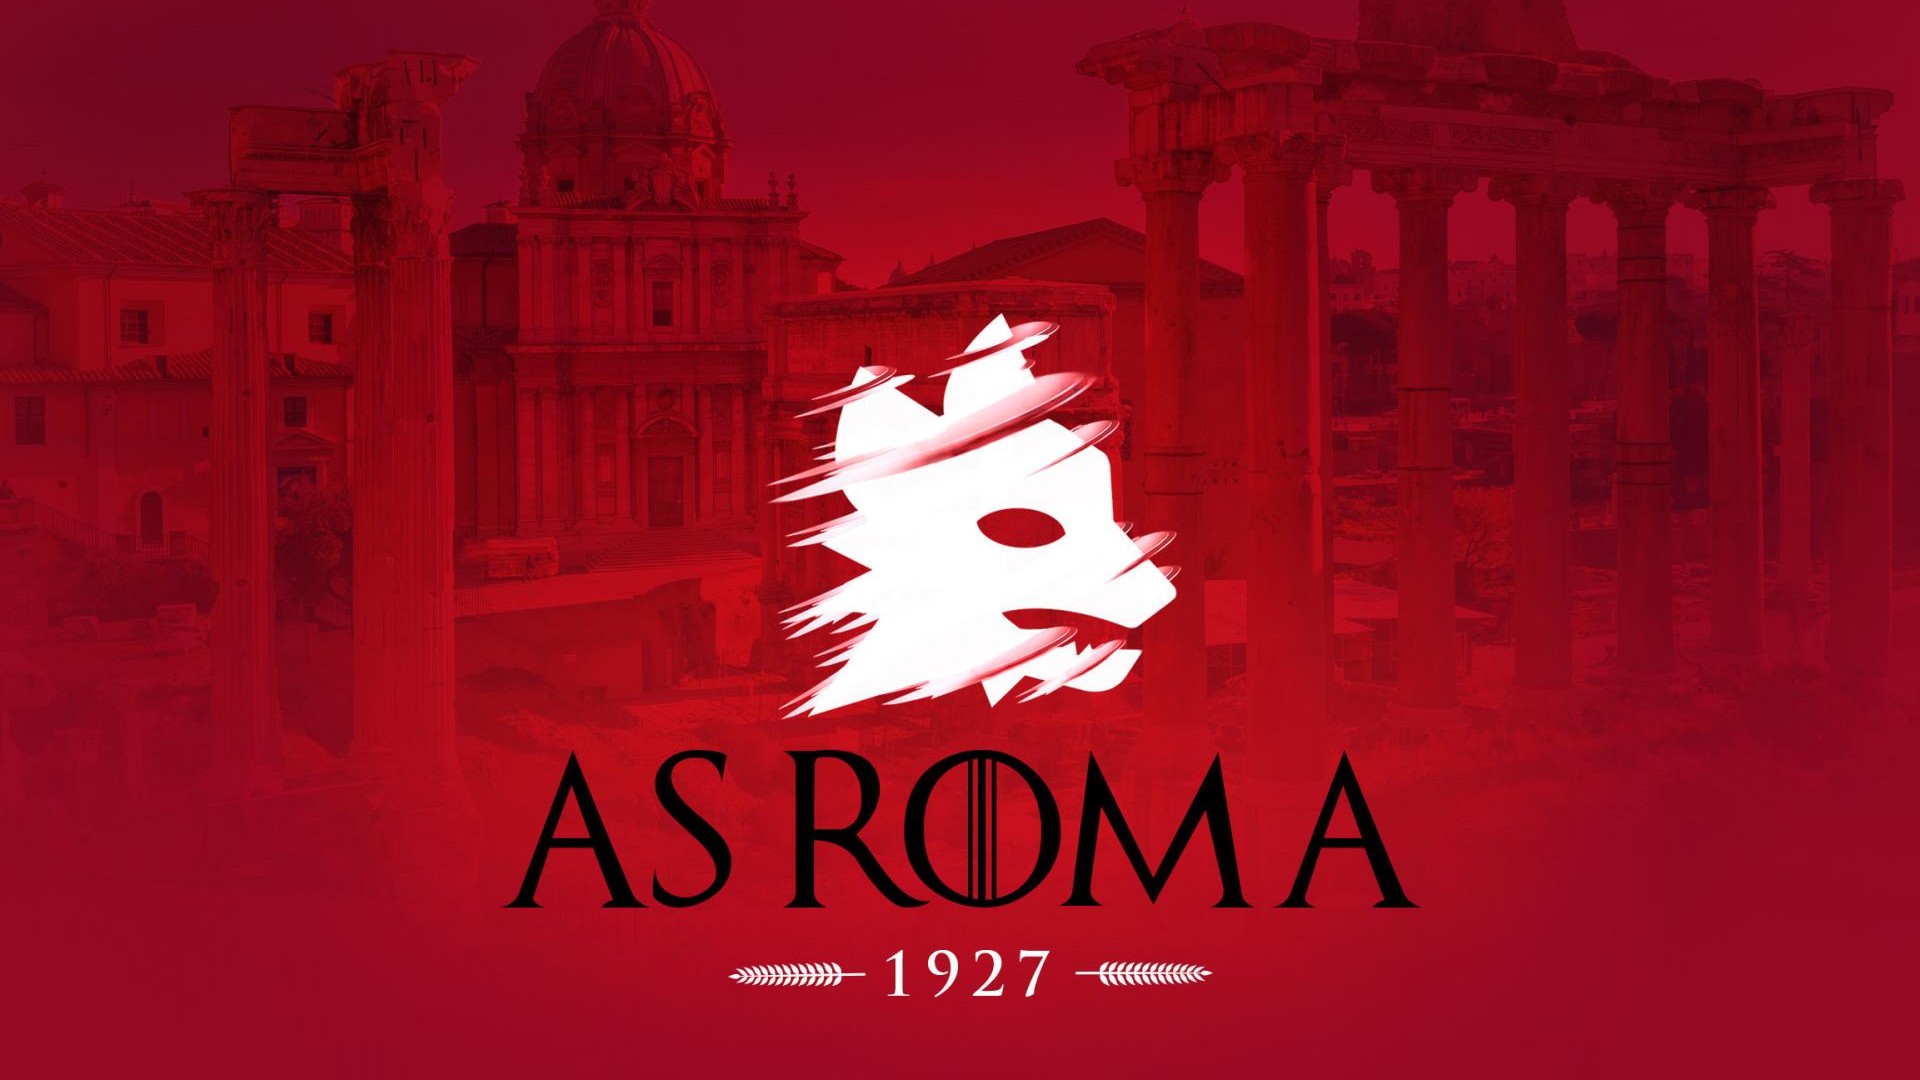 AS Roma For Desktop Wallpaper With high-resolution 1920X1080 pixel. You can use this wallpaper for your Desktop Computers, Mac Screensavers, Windows Backgrounds, iPhone Wallpapers, Tablet or Android Lock screen and another Mobile device